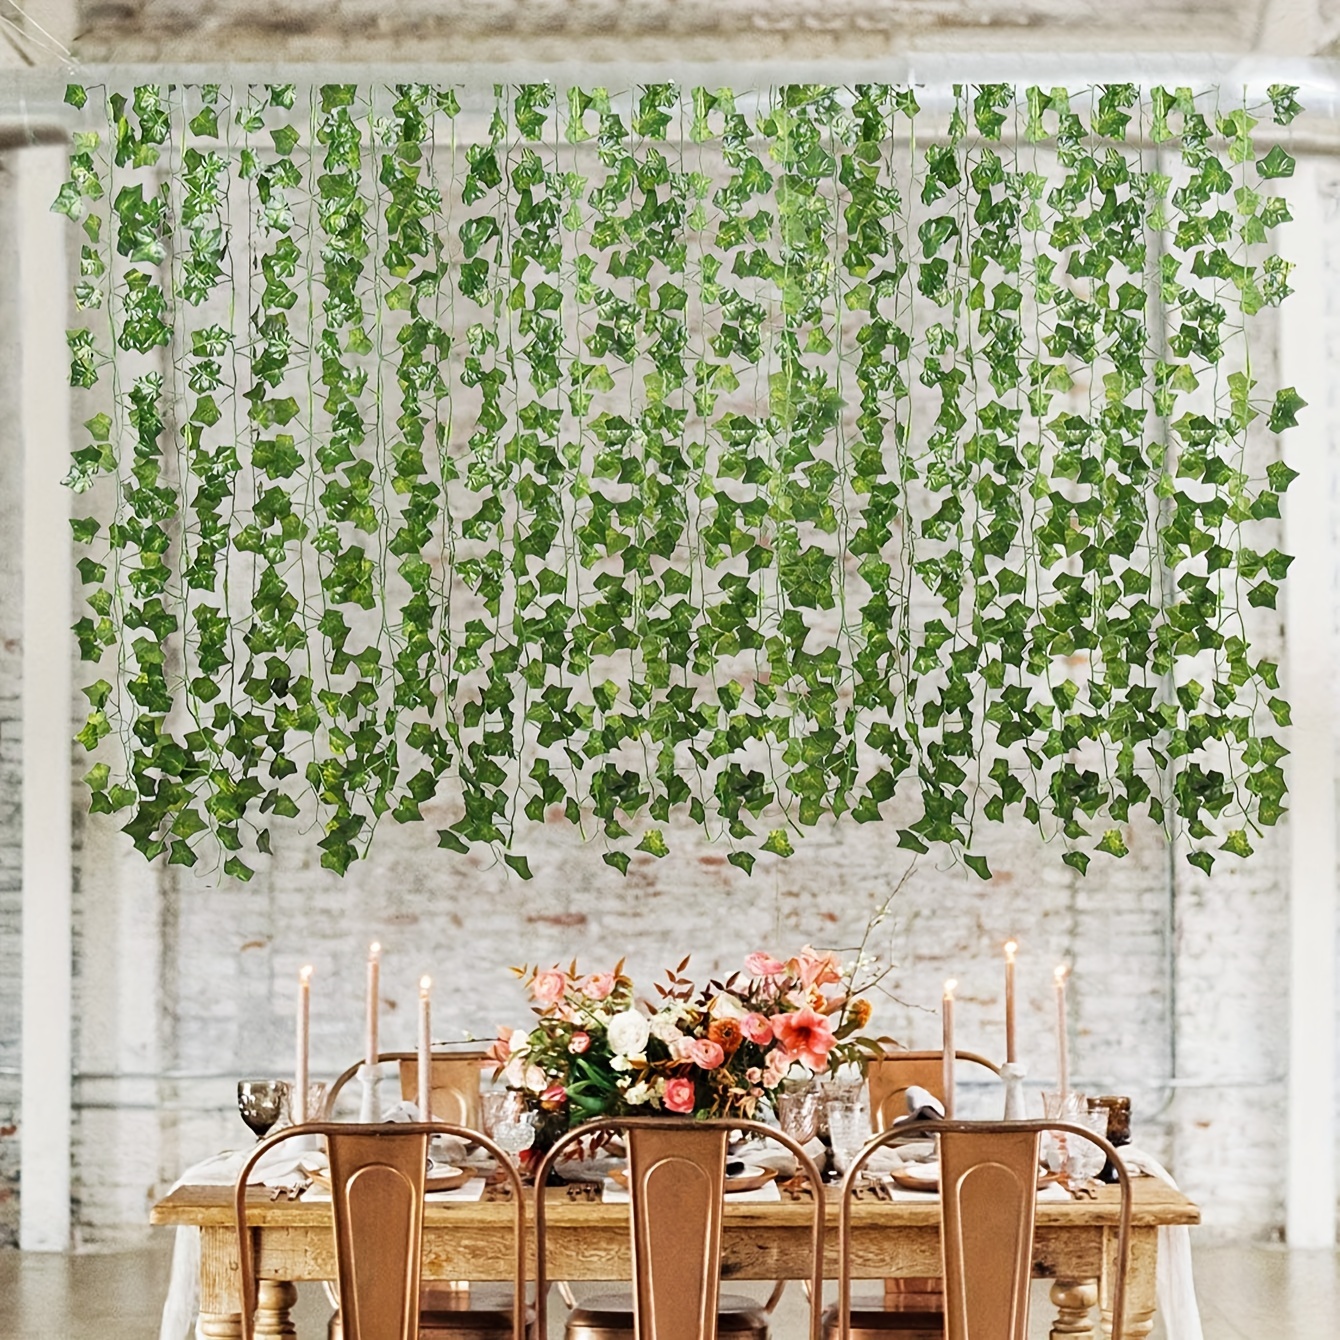 Artificial Plants Home Decor Green Silk Hanging vines Fake Leaf Garland  Leaves Diy For Wedding Party